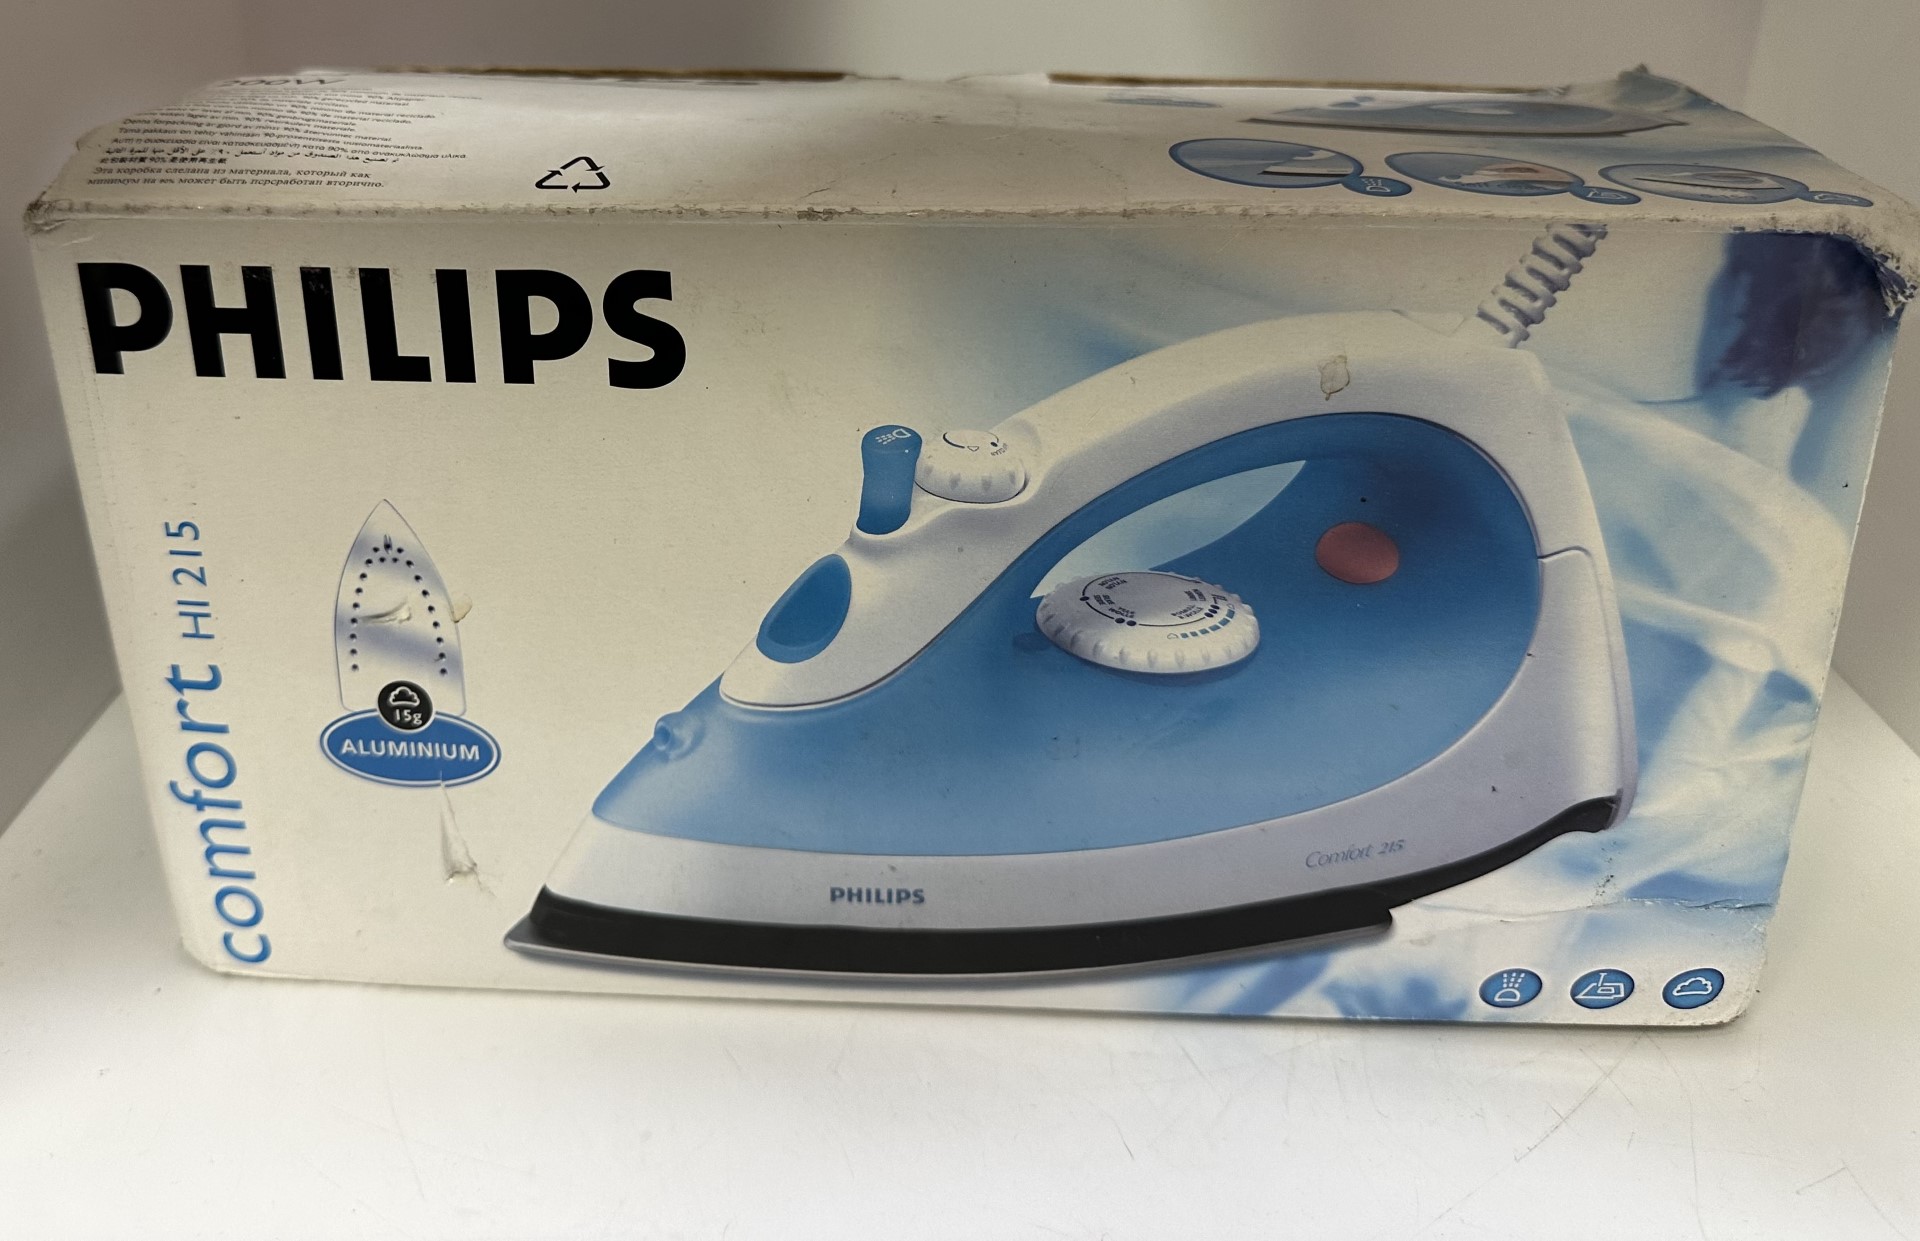 Phillips Comfort H1 215 1200W Iron Boxed